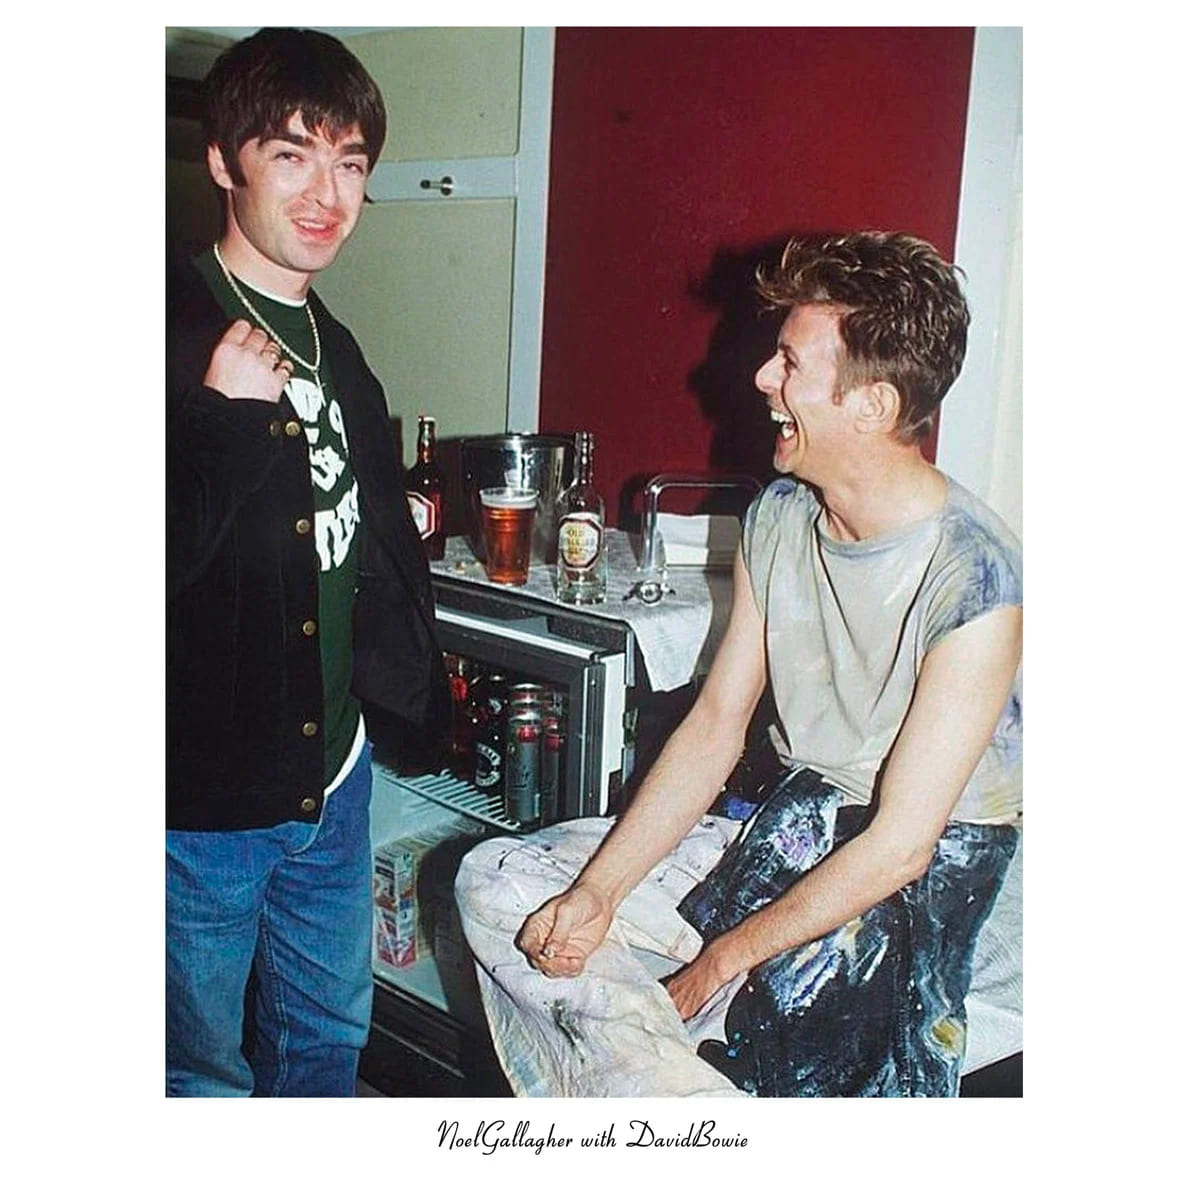 Noel Gallagher of Oasis and David Bowie